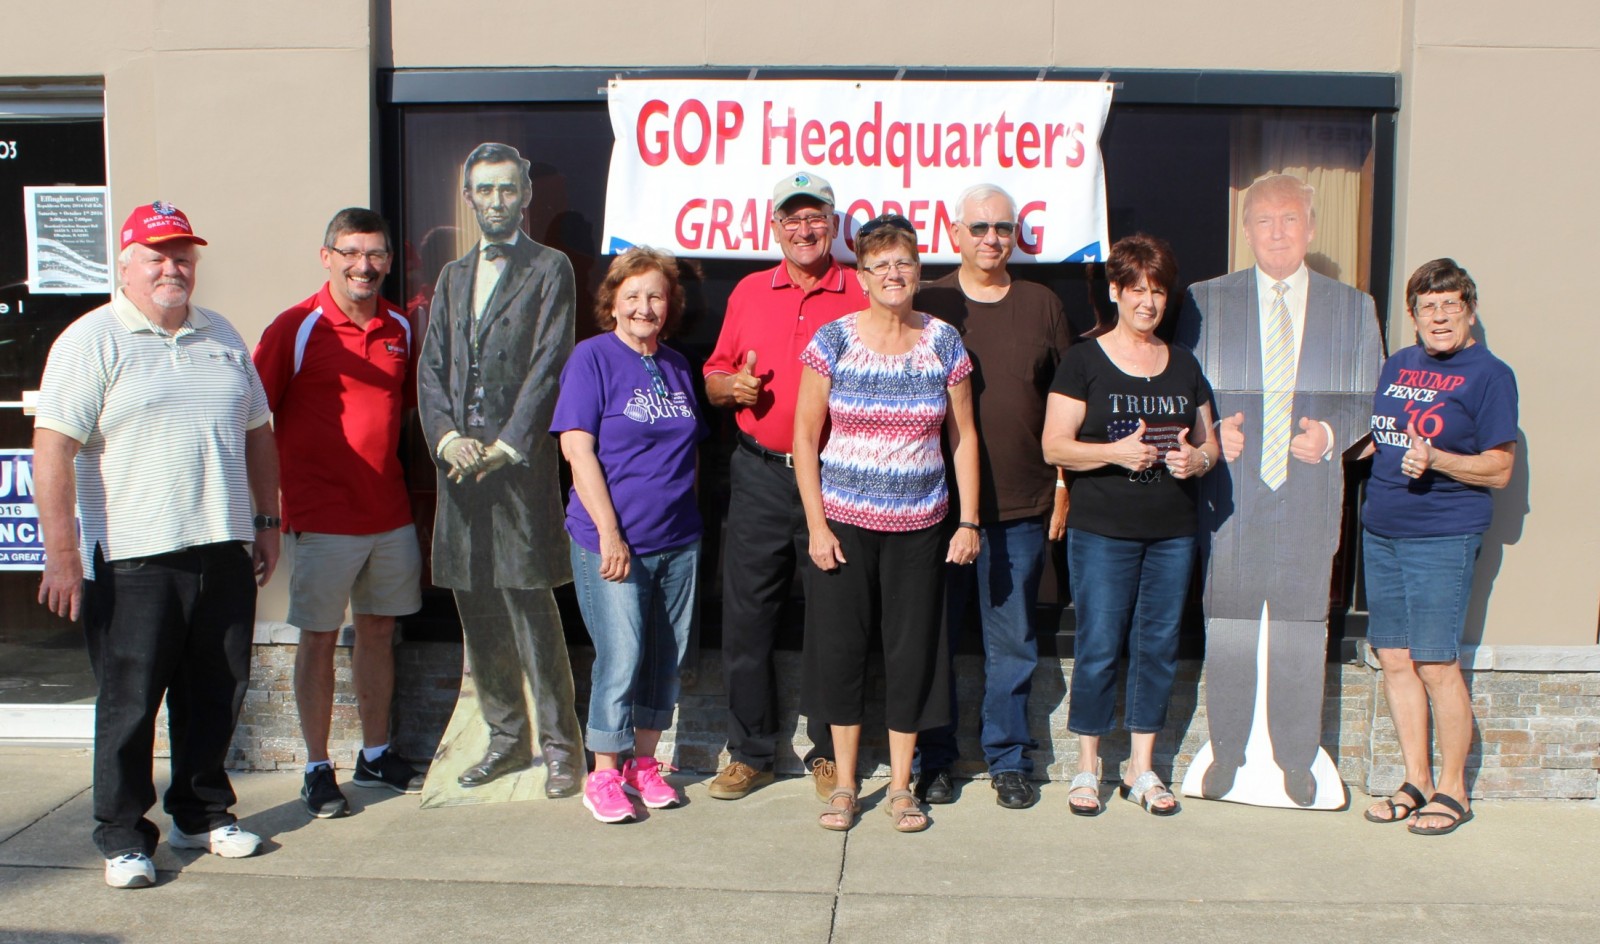 Effingham County Republicans gather at the newly opened GOP Headquarters in downtown Effingham